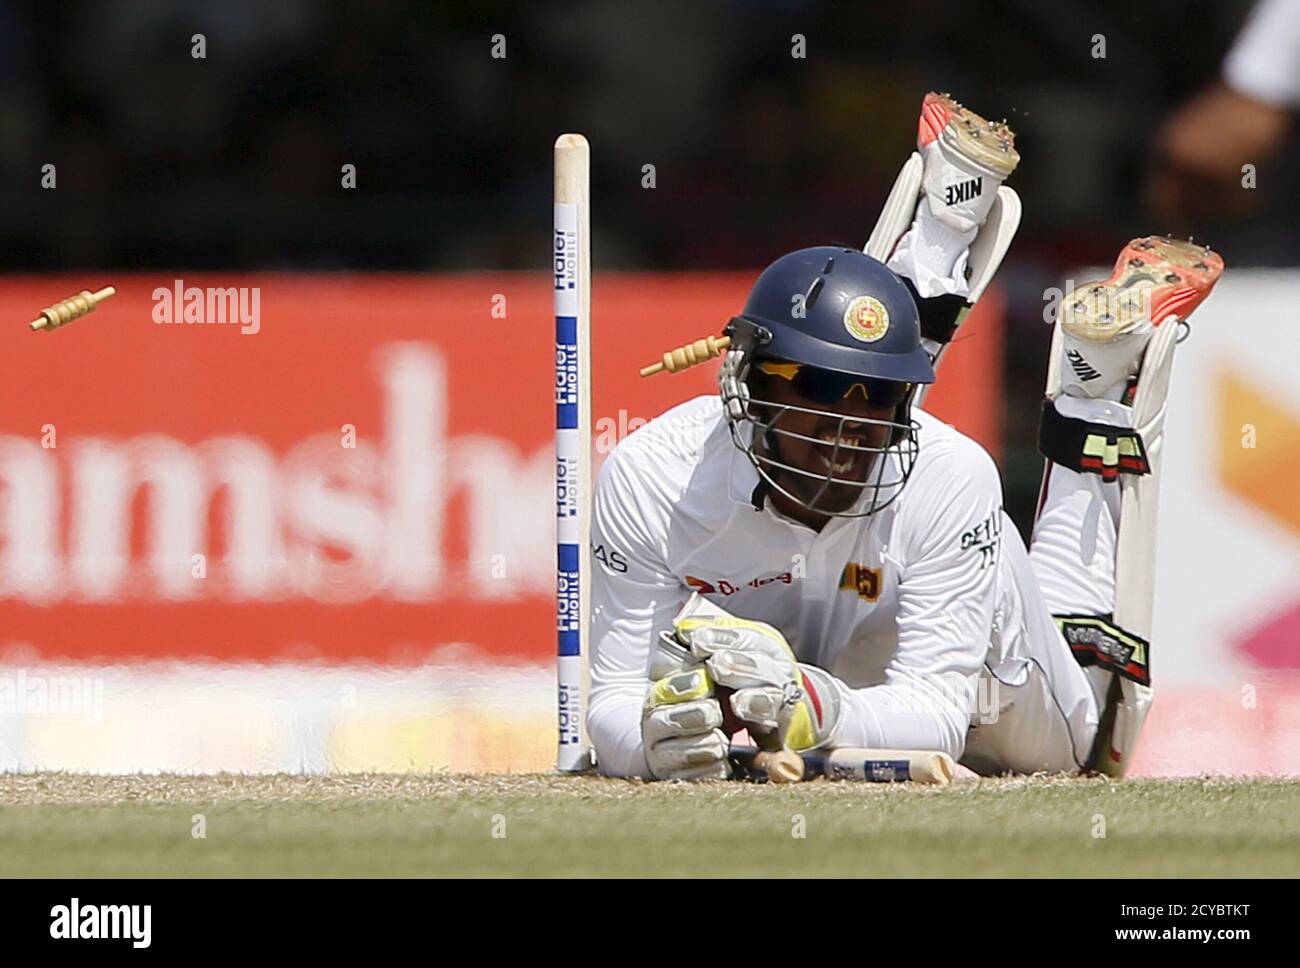 Sri Lanka's wicketkeeper Dinesh Chandimal runs out Pakistan's captain Misbah-ul-Haq (not pictured) during the first day of their second test cricket match in Colombo June 25, 2015.  REUTERS/Dinuka Liyanawatte         TPX IMAGES OF THE DAY Stock Photo